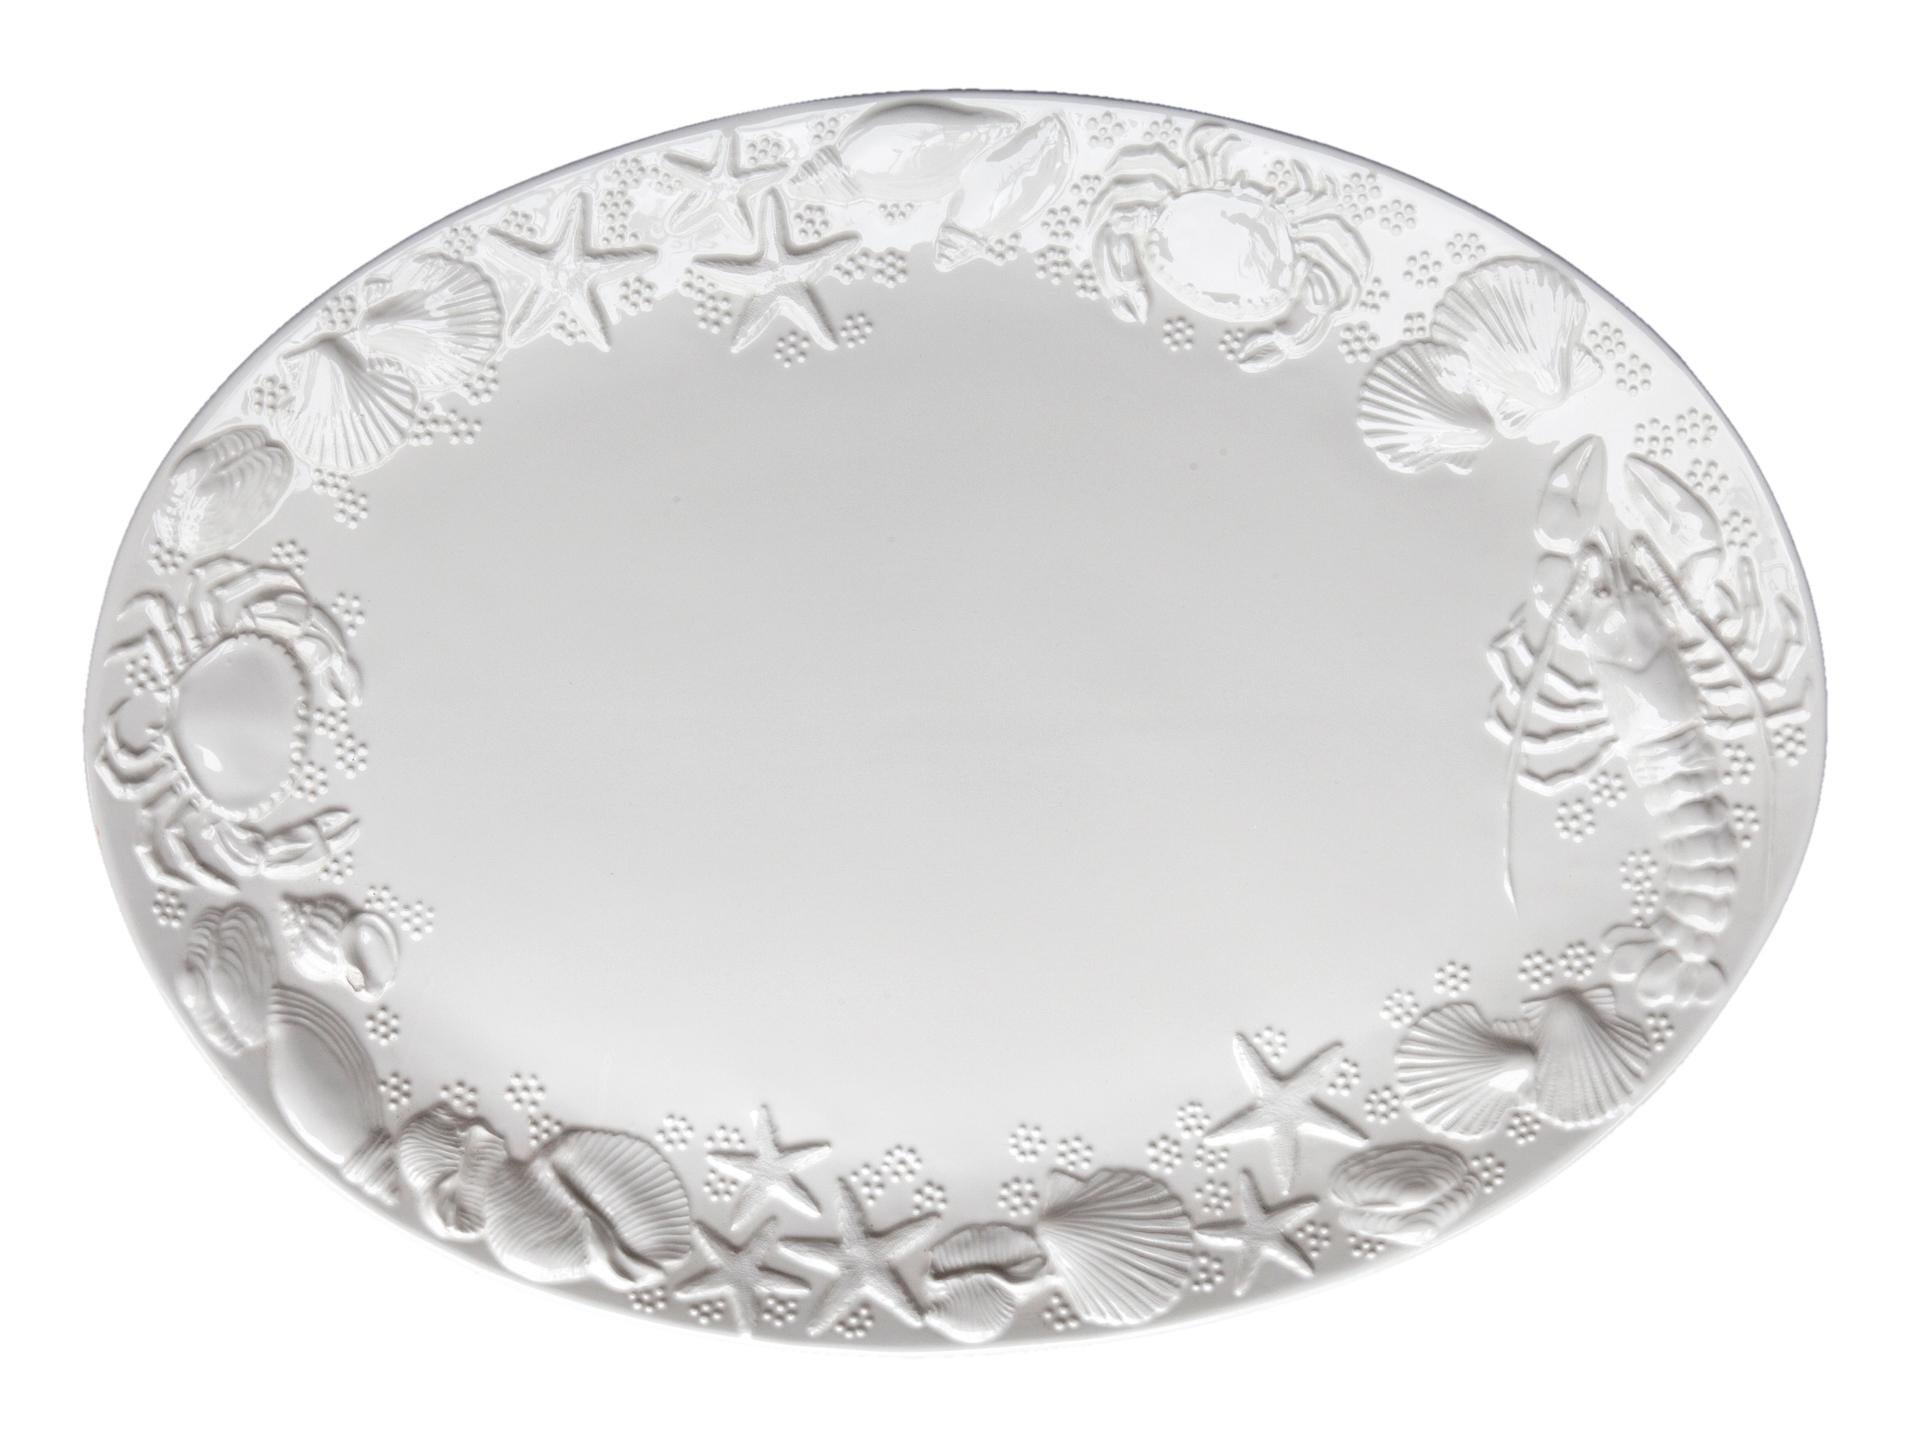 Large Italian ceramic serving platter featuring an embossed sea life motif.
Glossy white finish. Small spot missing the glaze, barely visible.